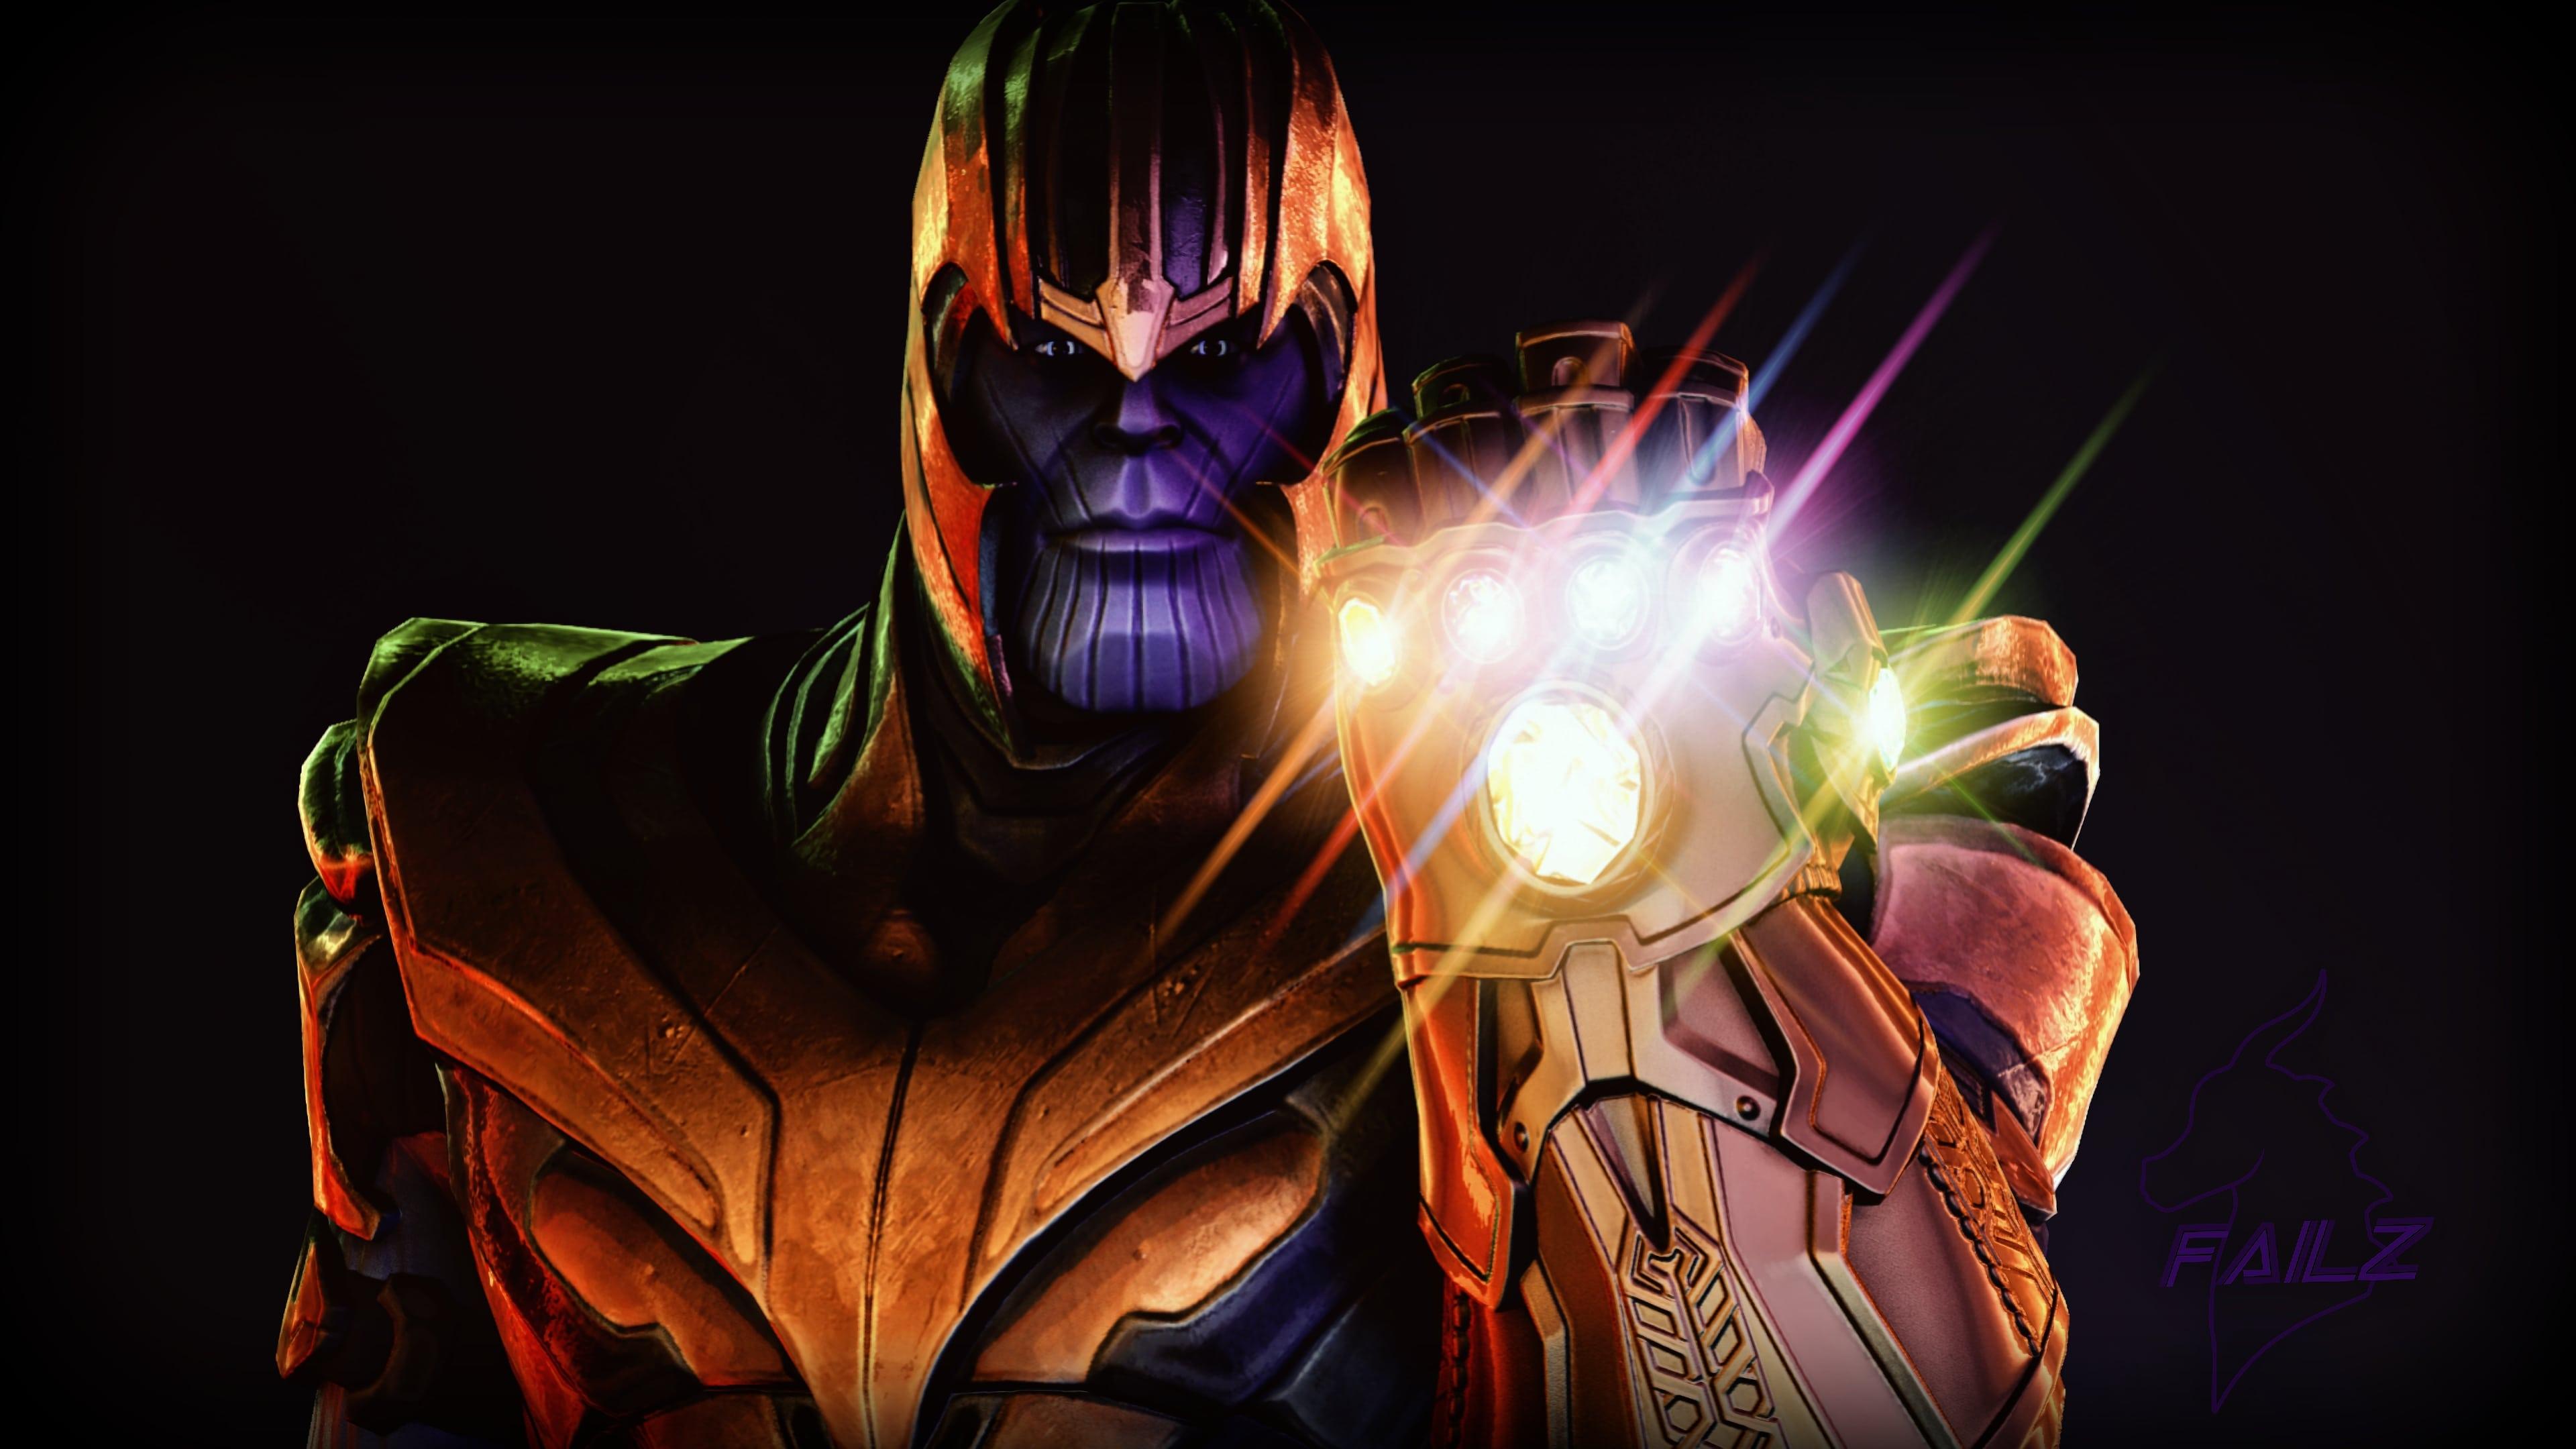 Thanos in Fortnite 4k Ultra HD Wallpaper. Background Image